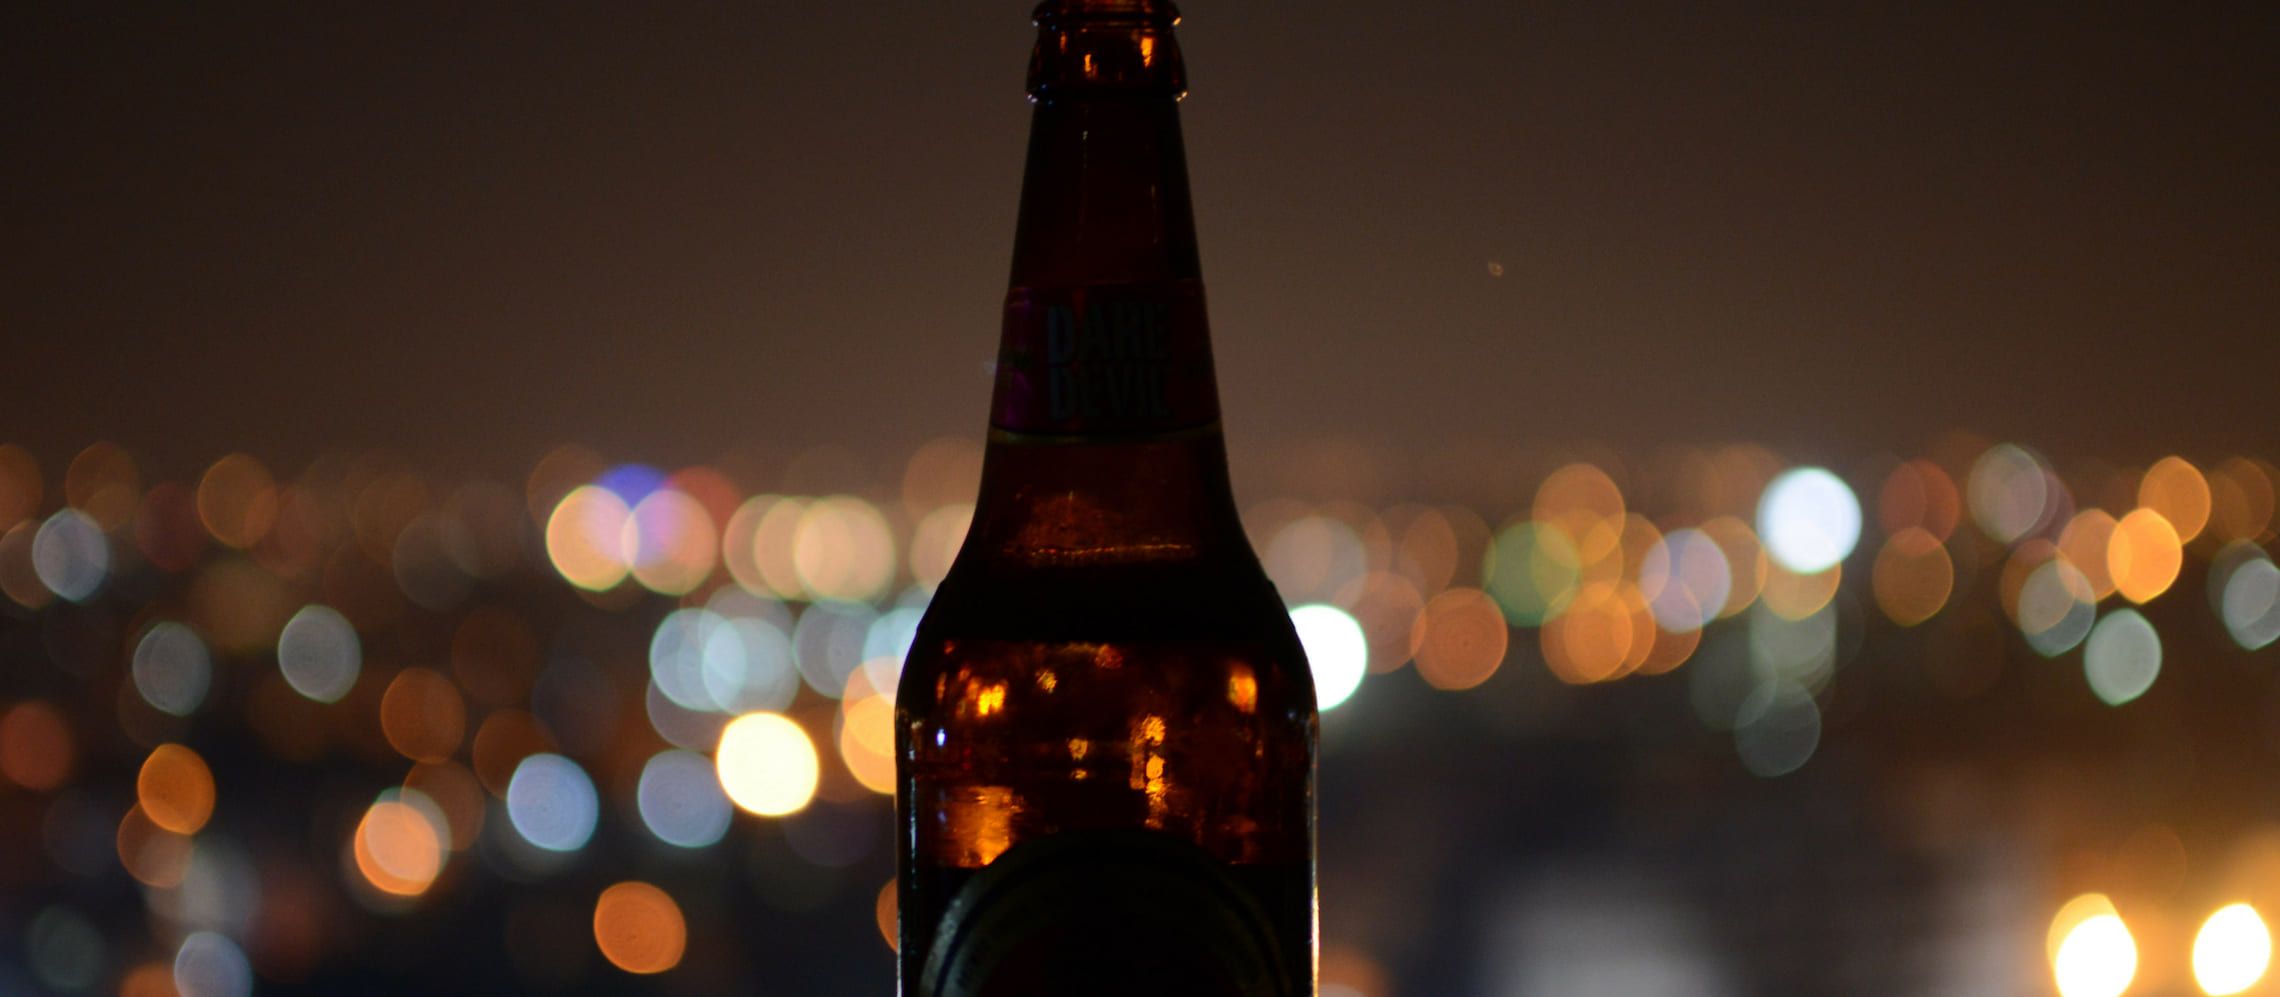 Photo for: The Next Era Of Craft Beer Marketing: What Comes Next